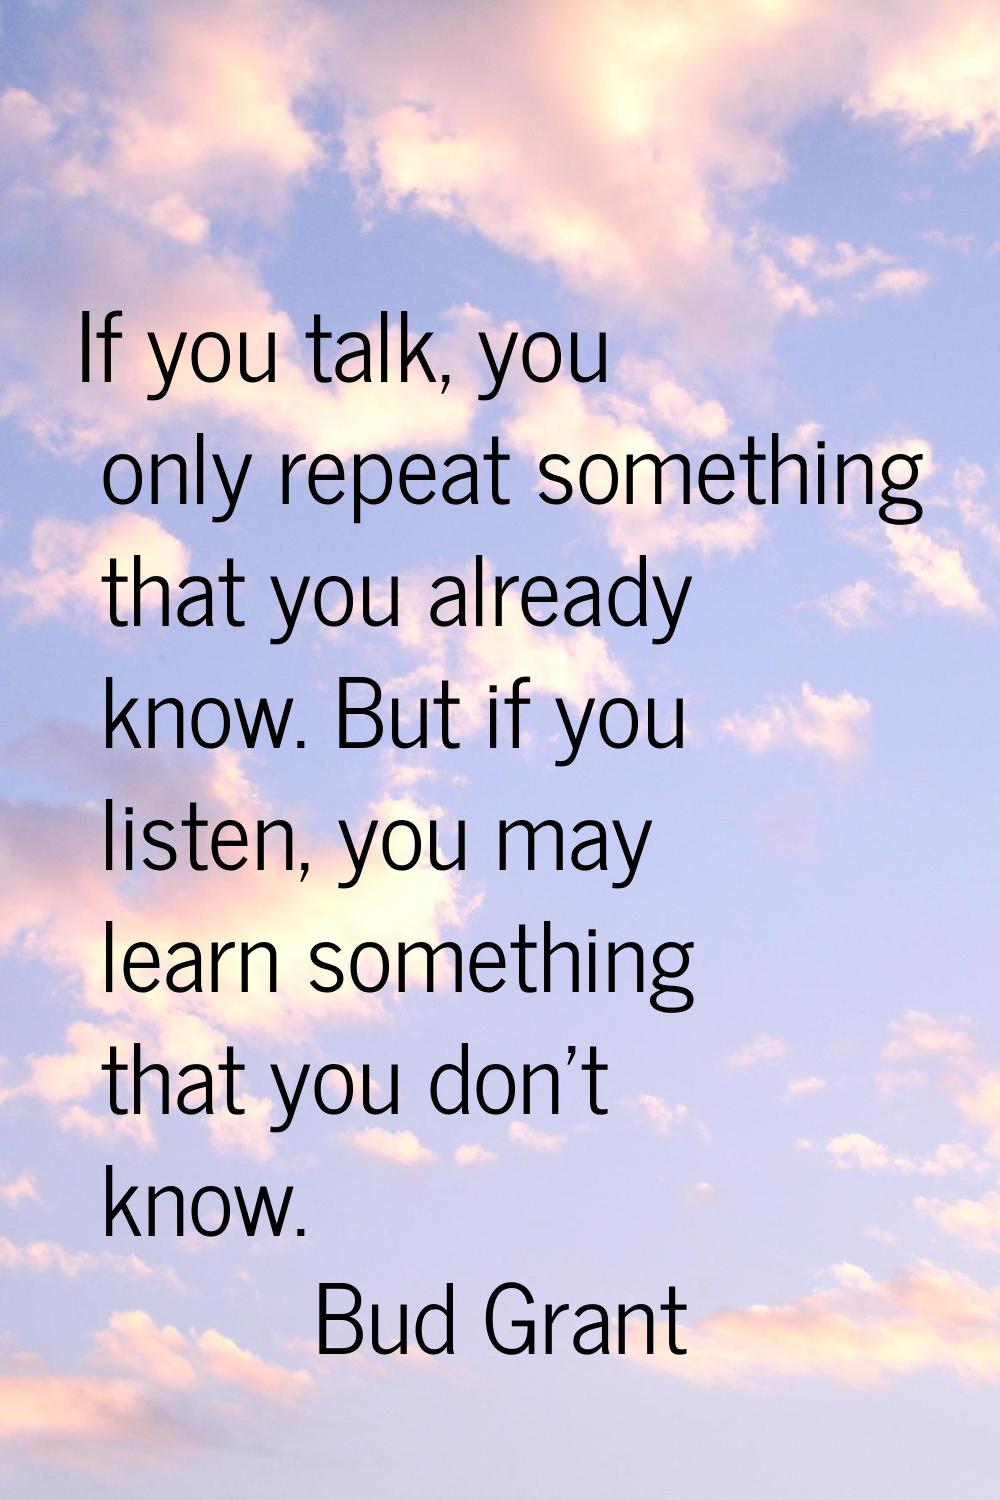 If you talk, you only repeat something that you already know. But if you listen, you may learn some